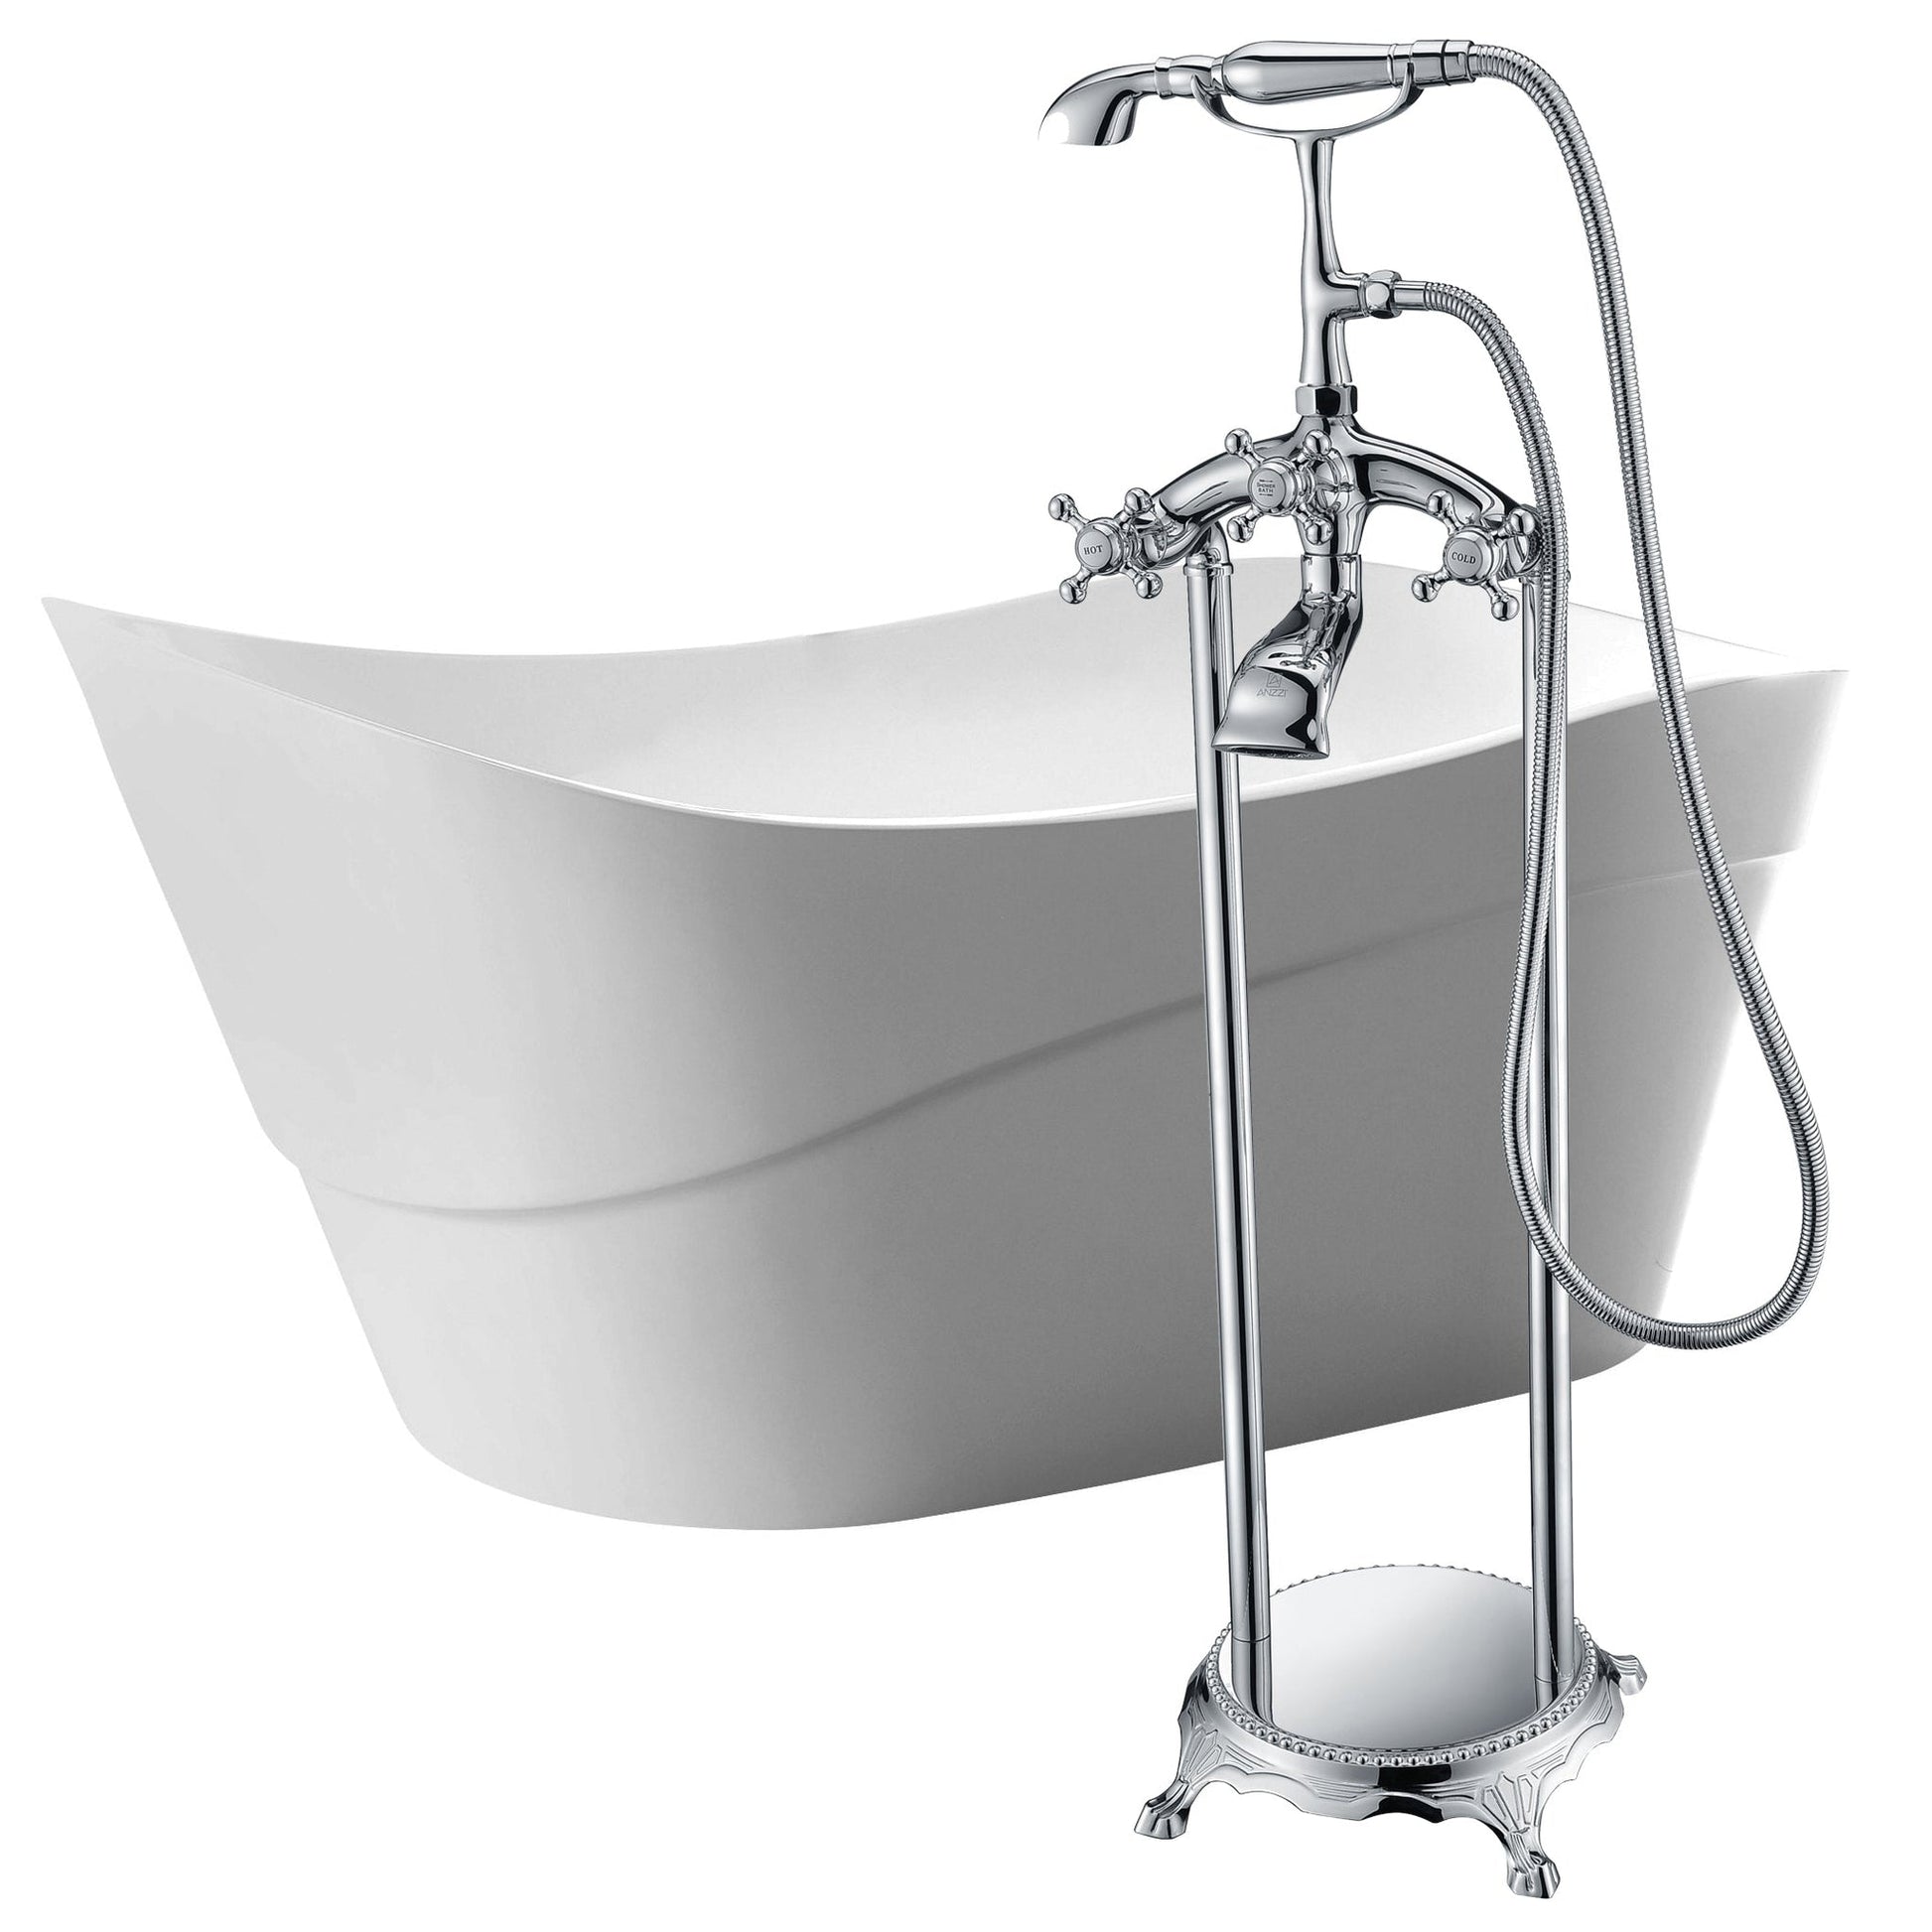 ANZZI Kahl Series 67" x 32" Glossy White Freestanding Glossy White Bathtub With Built-In Overflow, Pop Up Drain and Tugela Bathtub Faucet